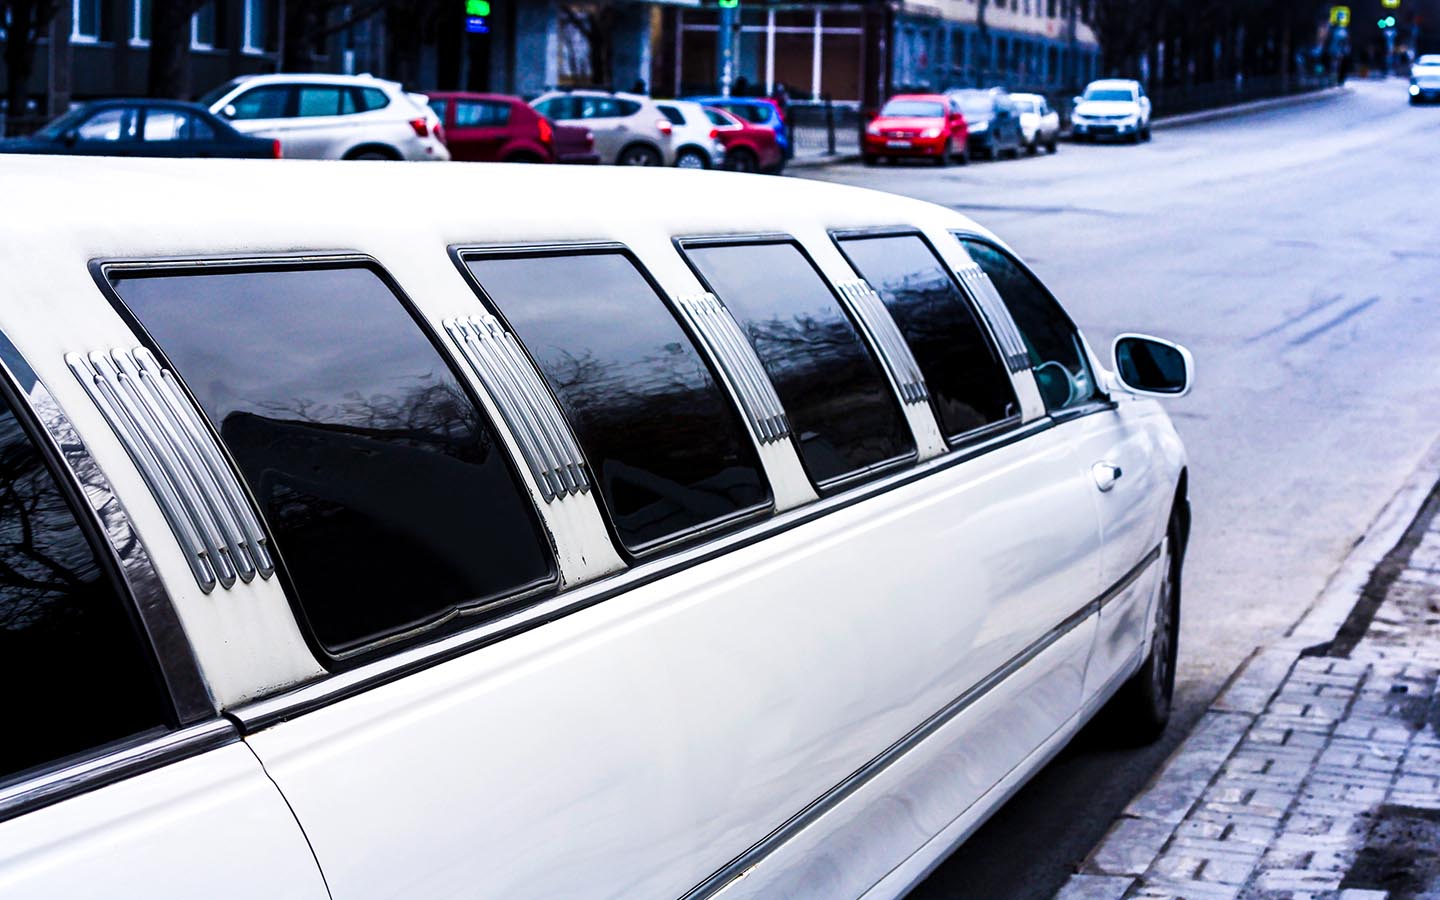 learn all about how to start limousine business in Dubai and start your business venture